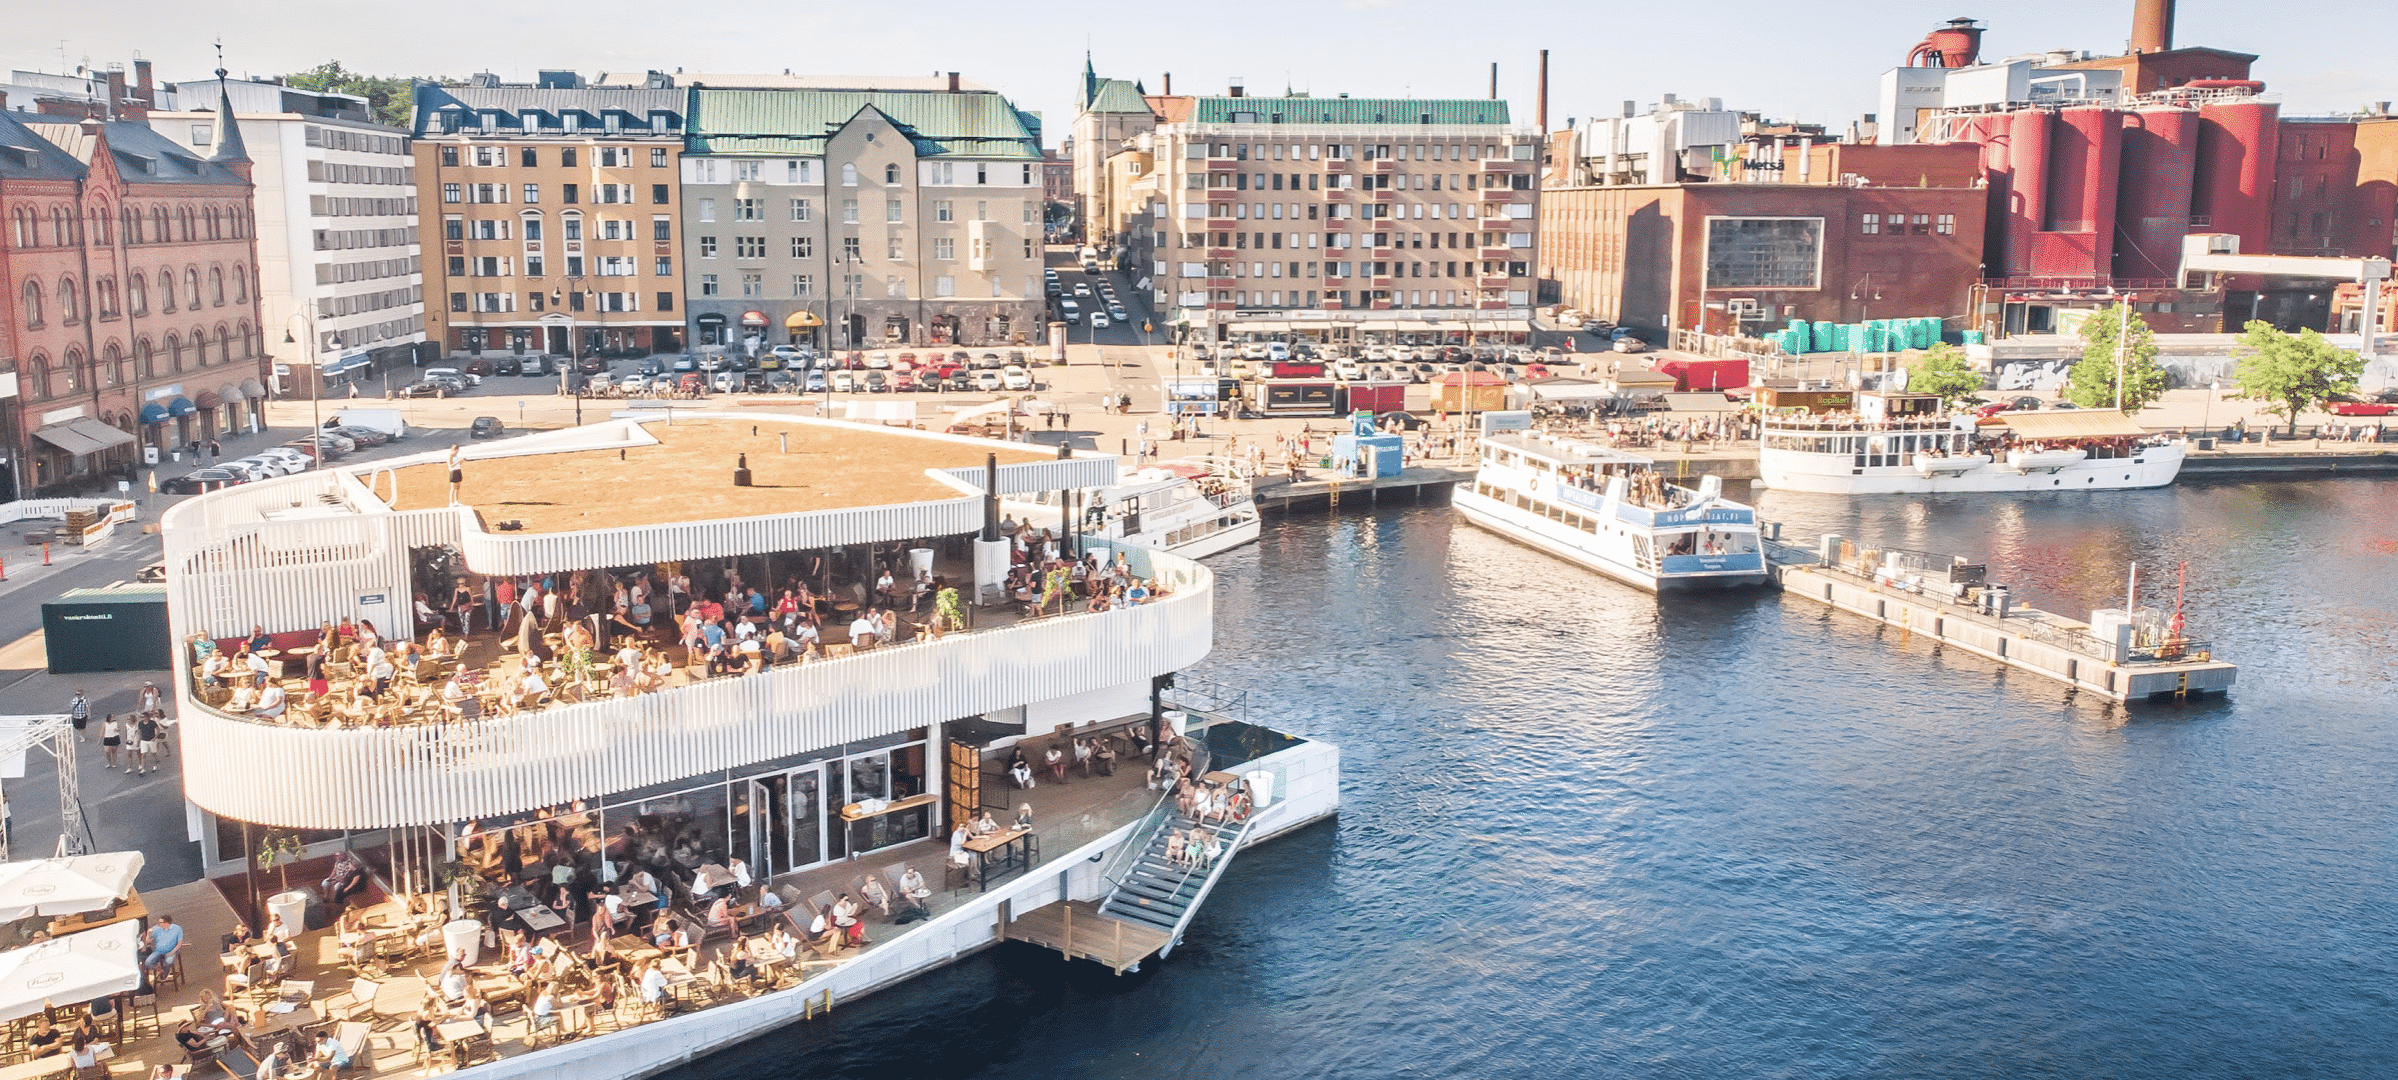 Sauna restaurant Kuuma with its terrace in the foreground, Laukontori harbour of Tampere in the background.